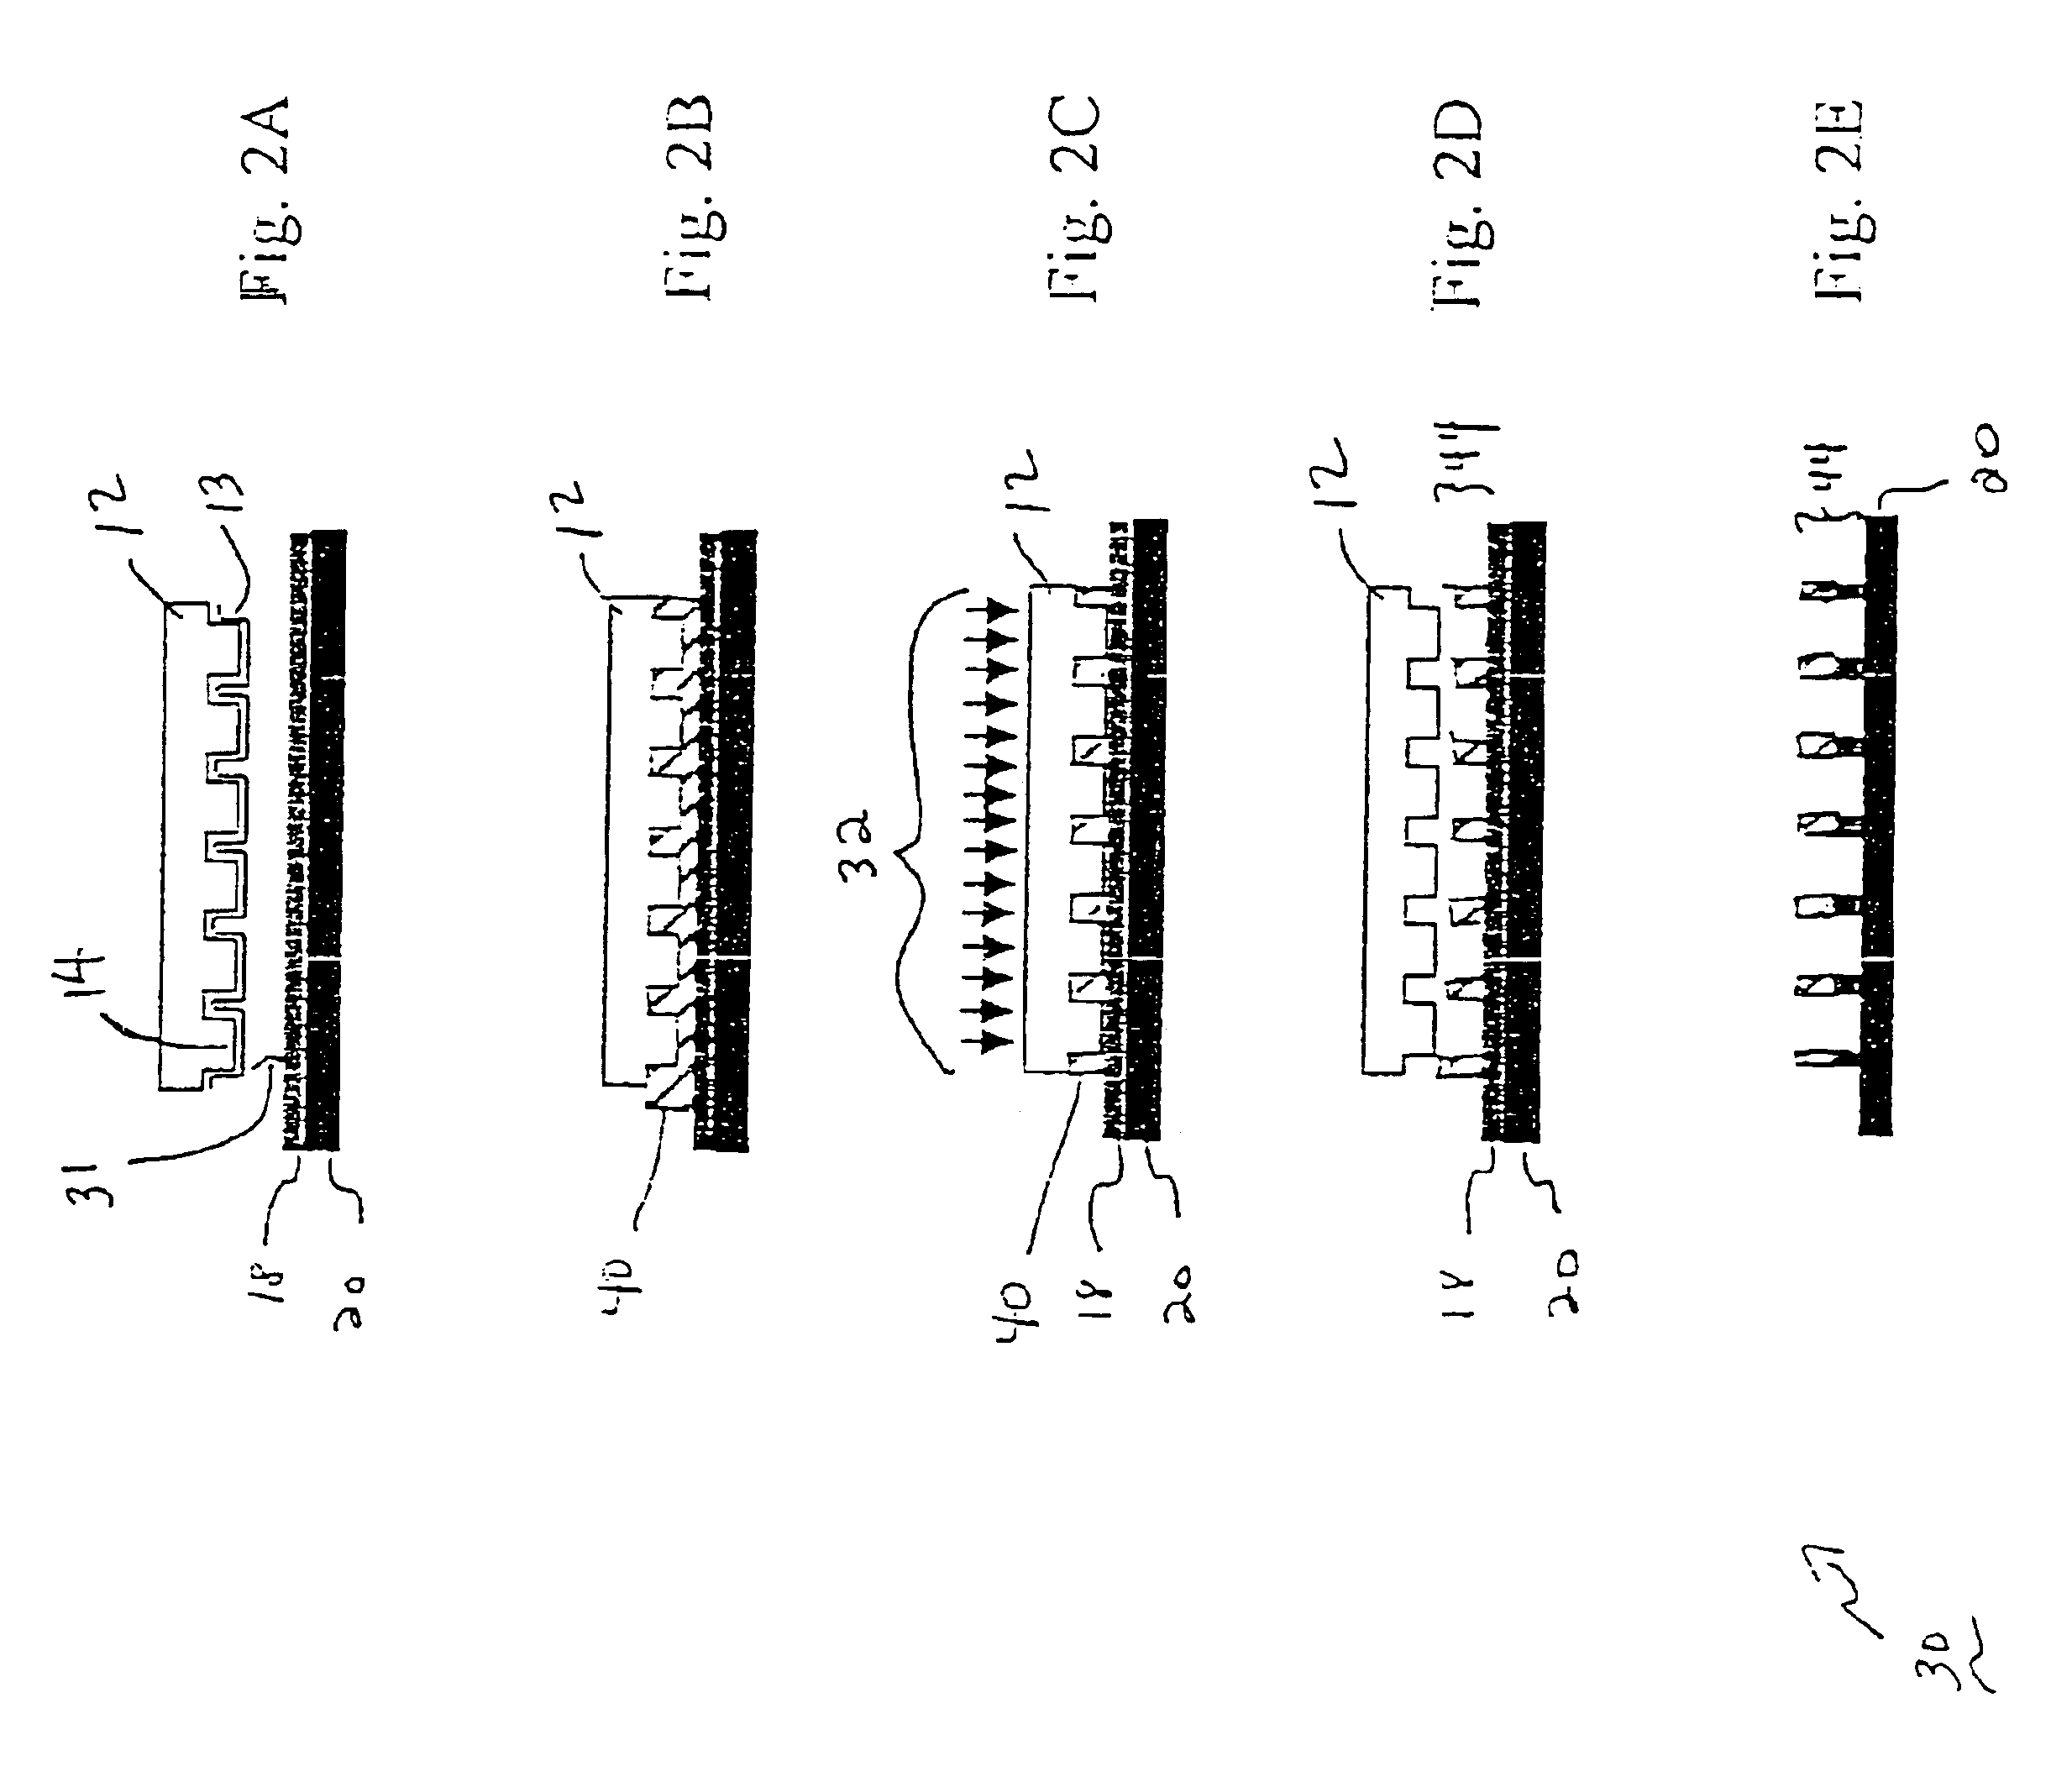 Methods for high-precision gap and orientation sensing between a transparent template and substrate for imprint lithography